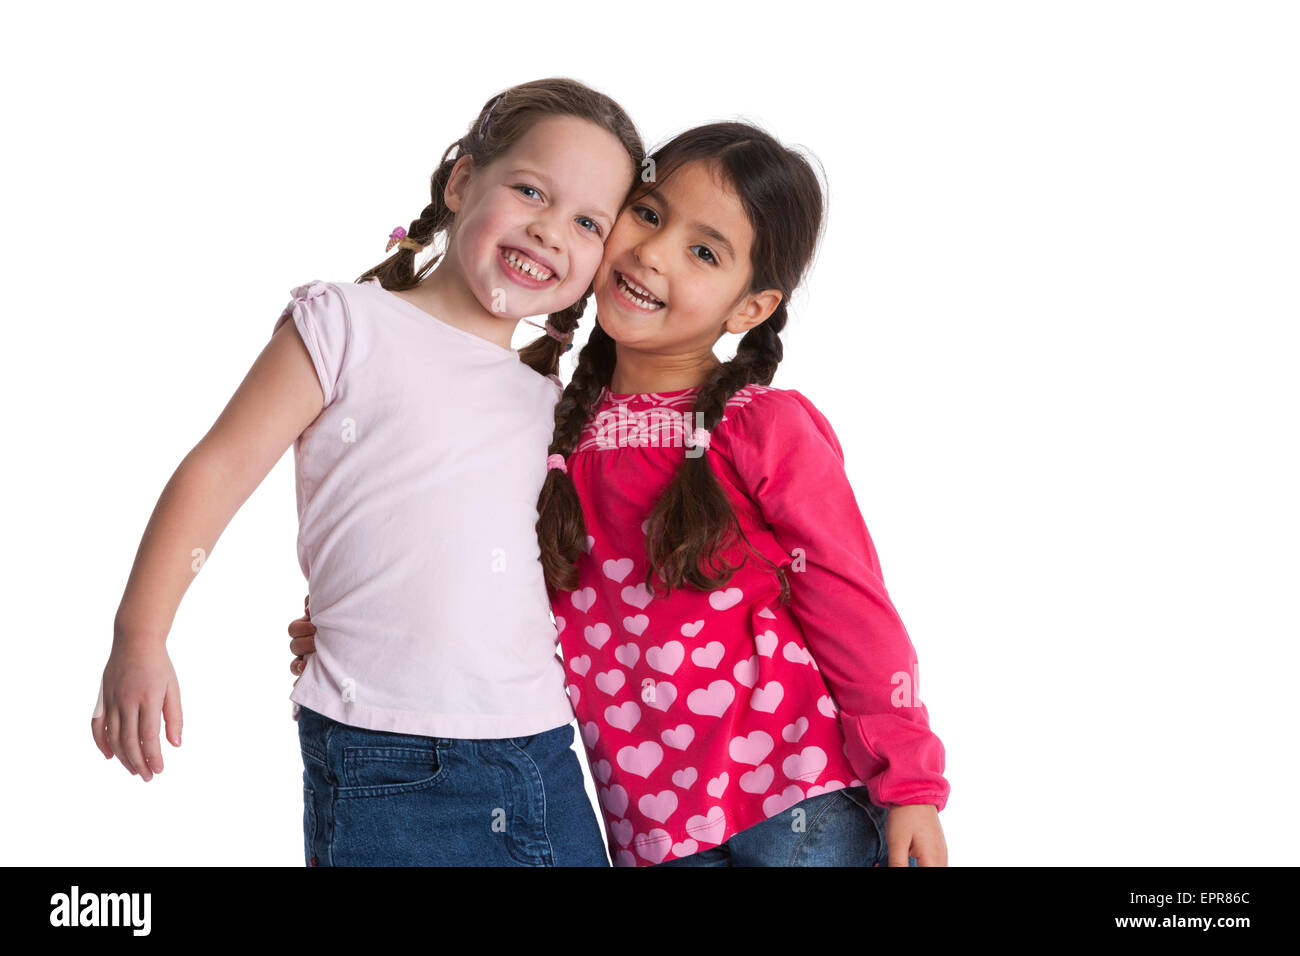 Portrait of a two happy five year old girl friends Stock Photo